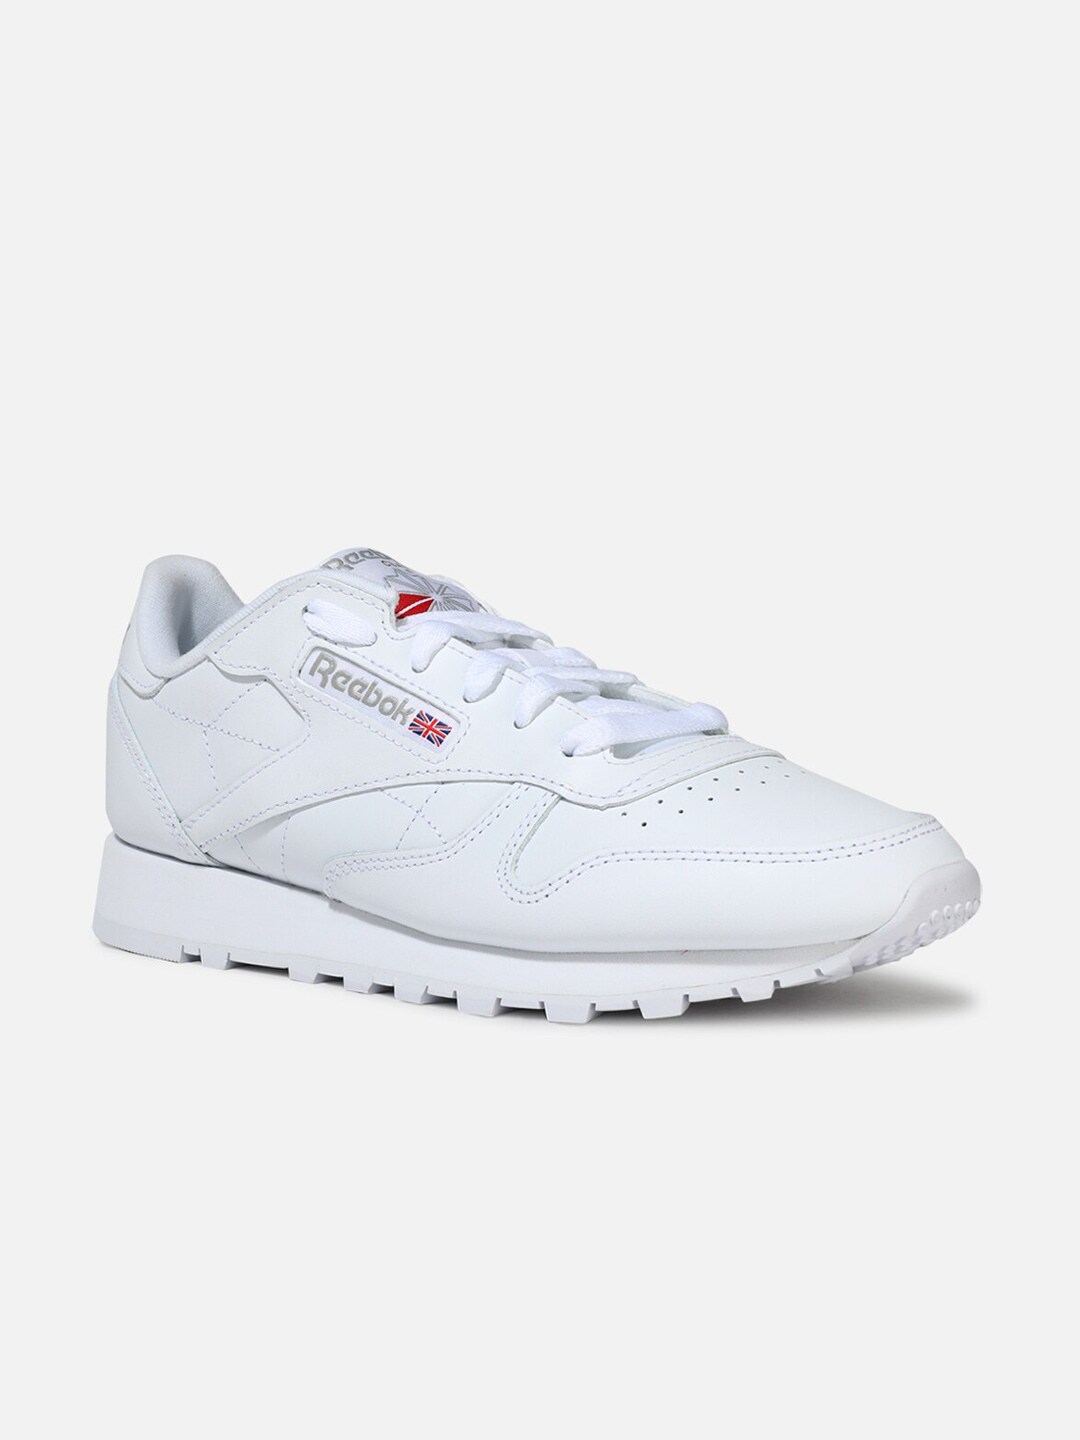 Reebok Women Reebok Rbk Classics Leather Running Shoes Price in India